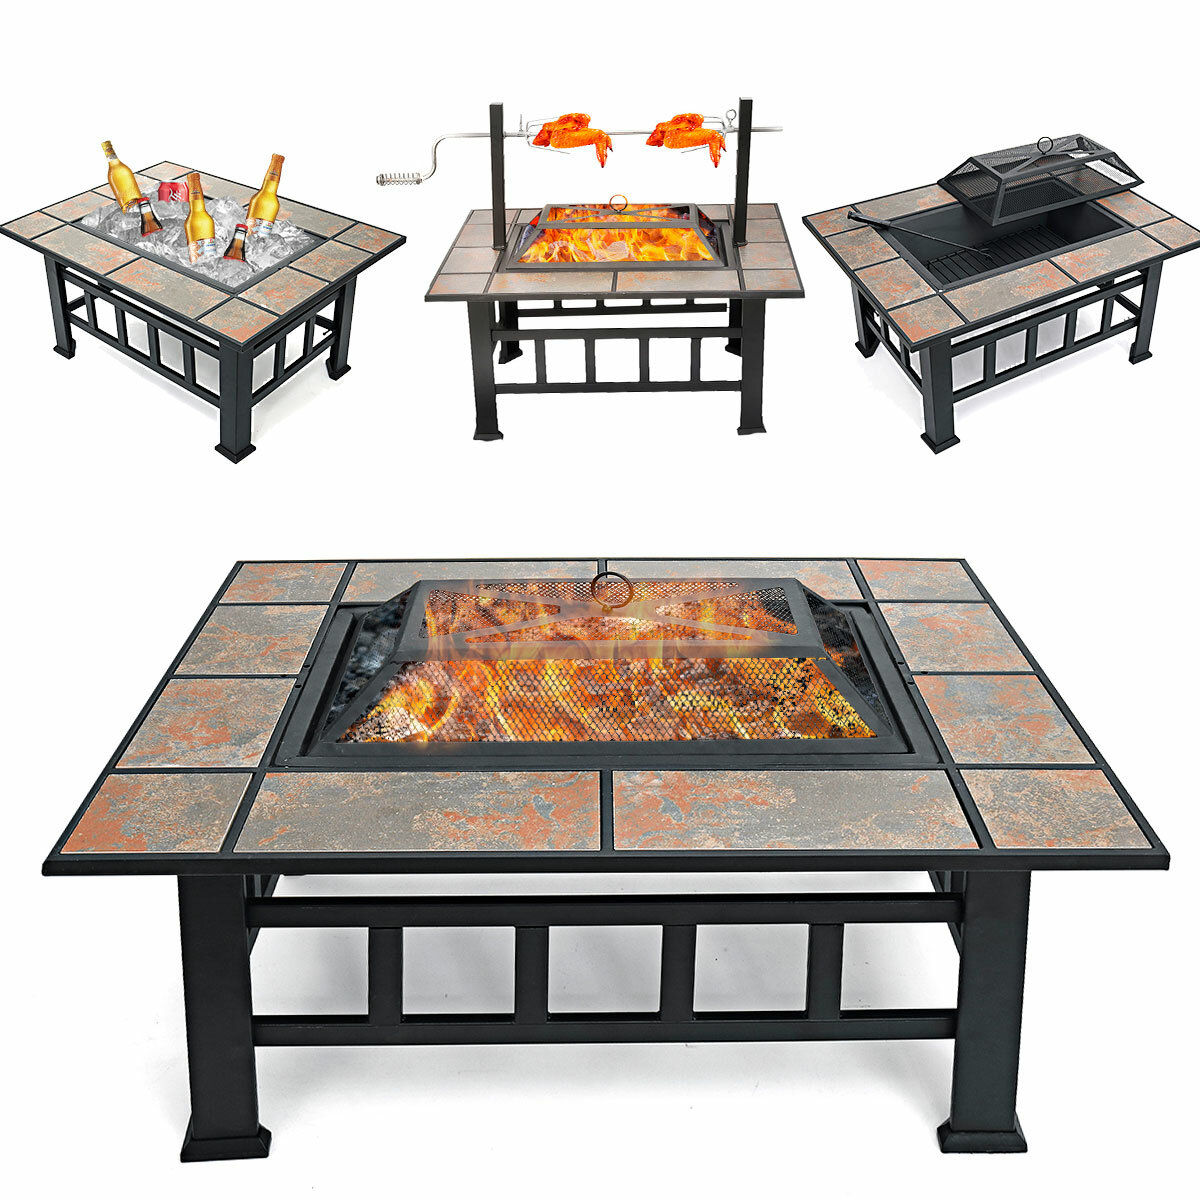 

SINGLYFIRE 37 Inch Fire Pit Table with Grill for Outside Large Square Wood Burning firepit Heavy Duty Steel Pit Cooking